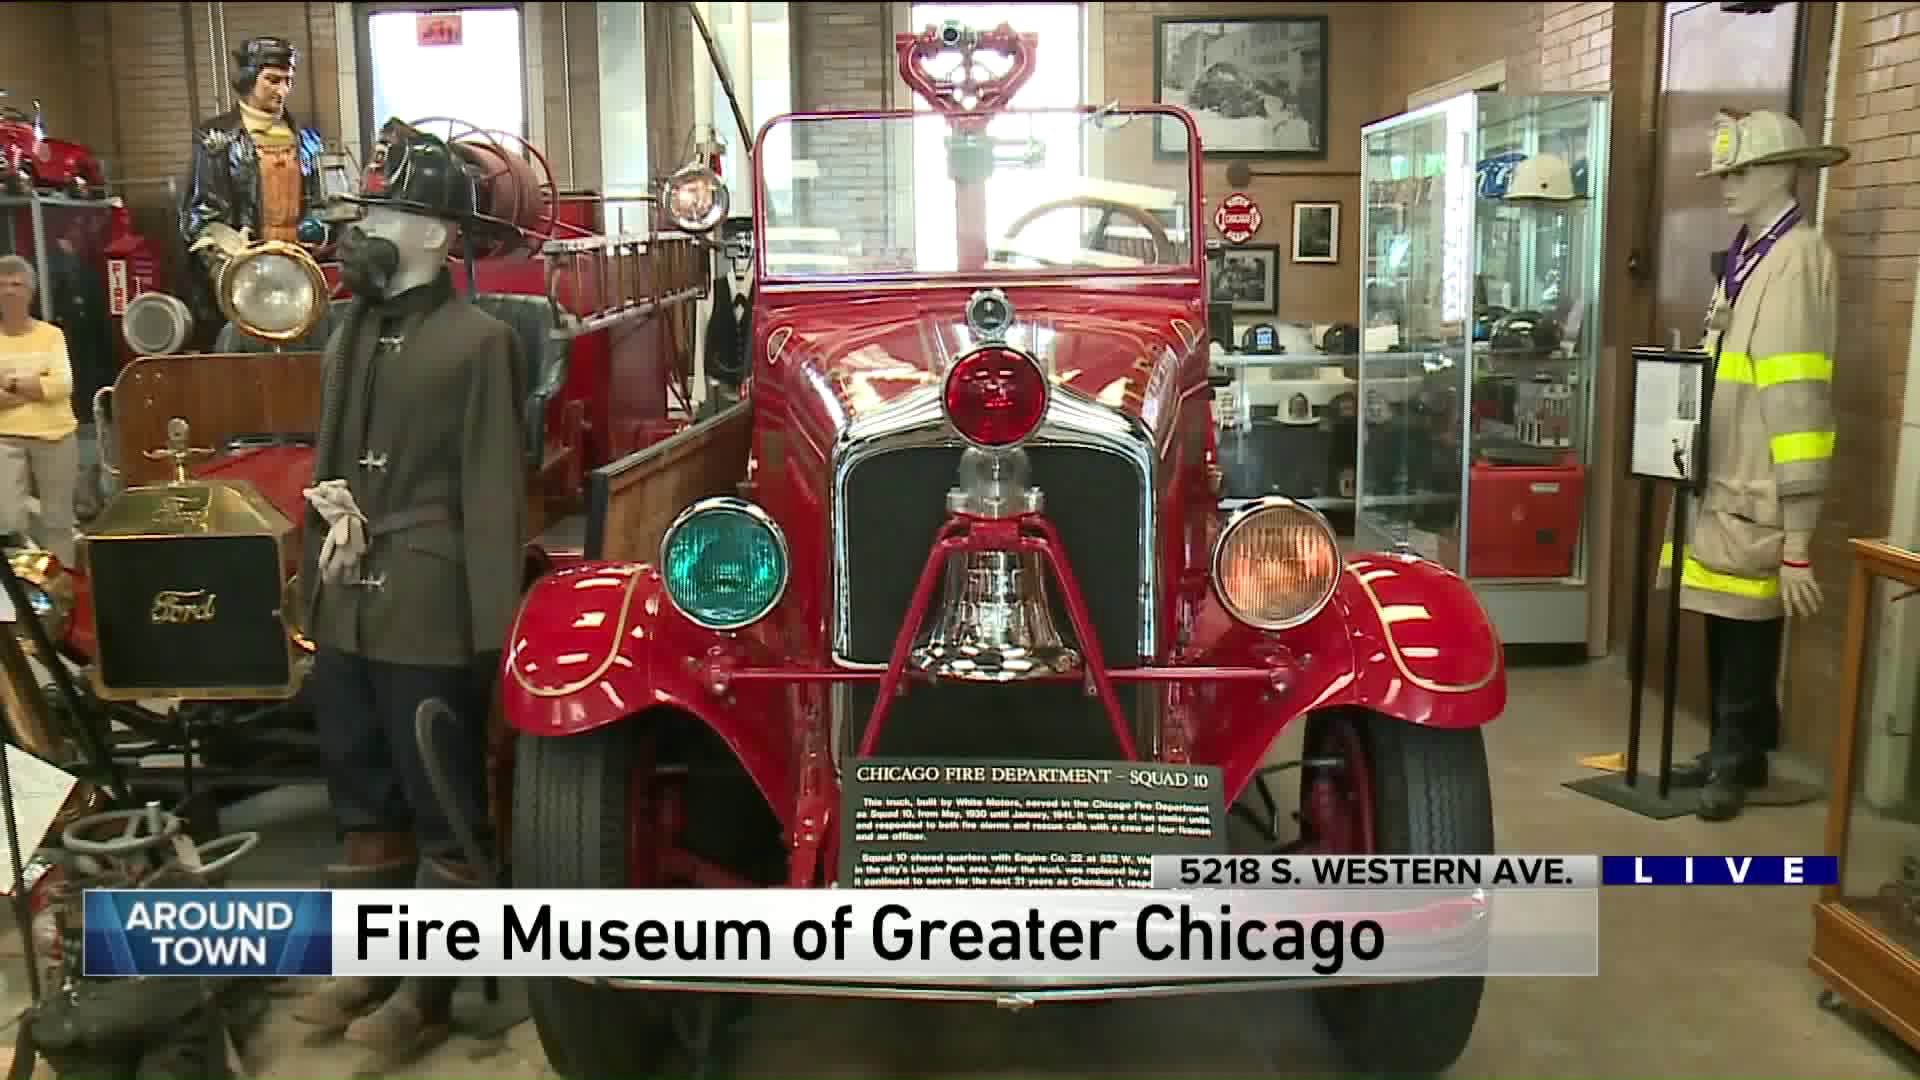 Around Town at the Fire Museum of Greater Chicago